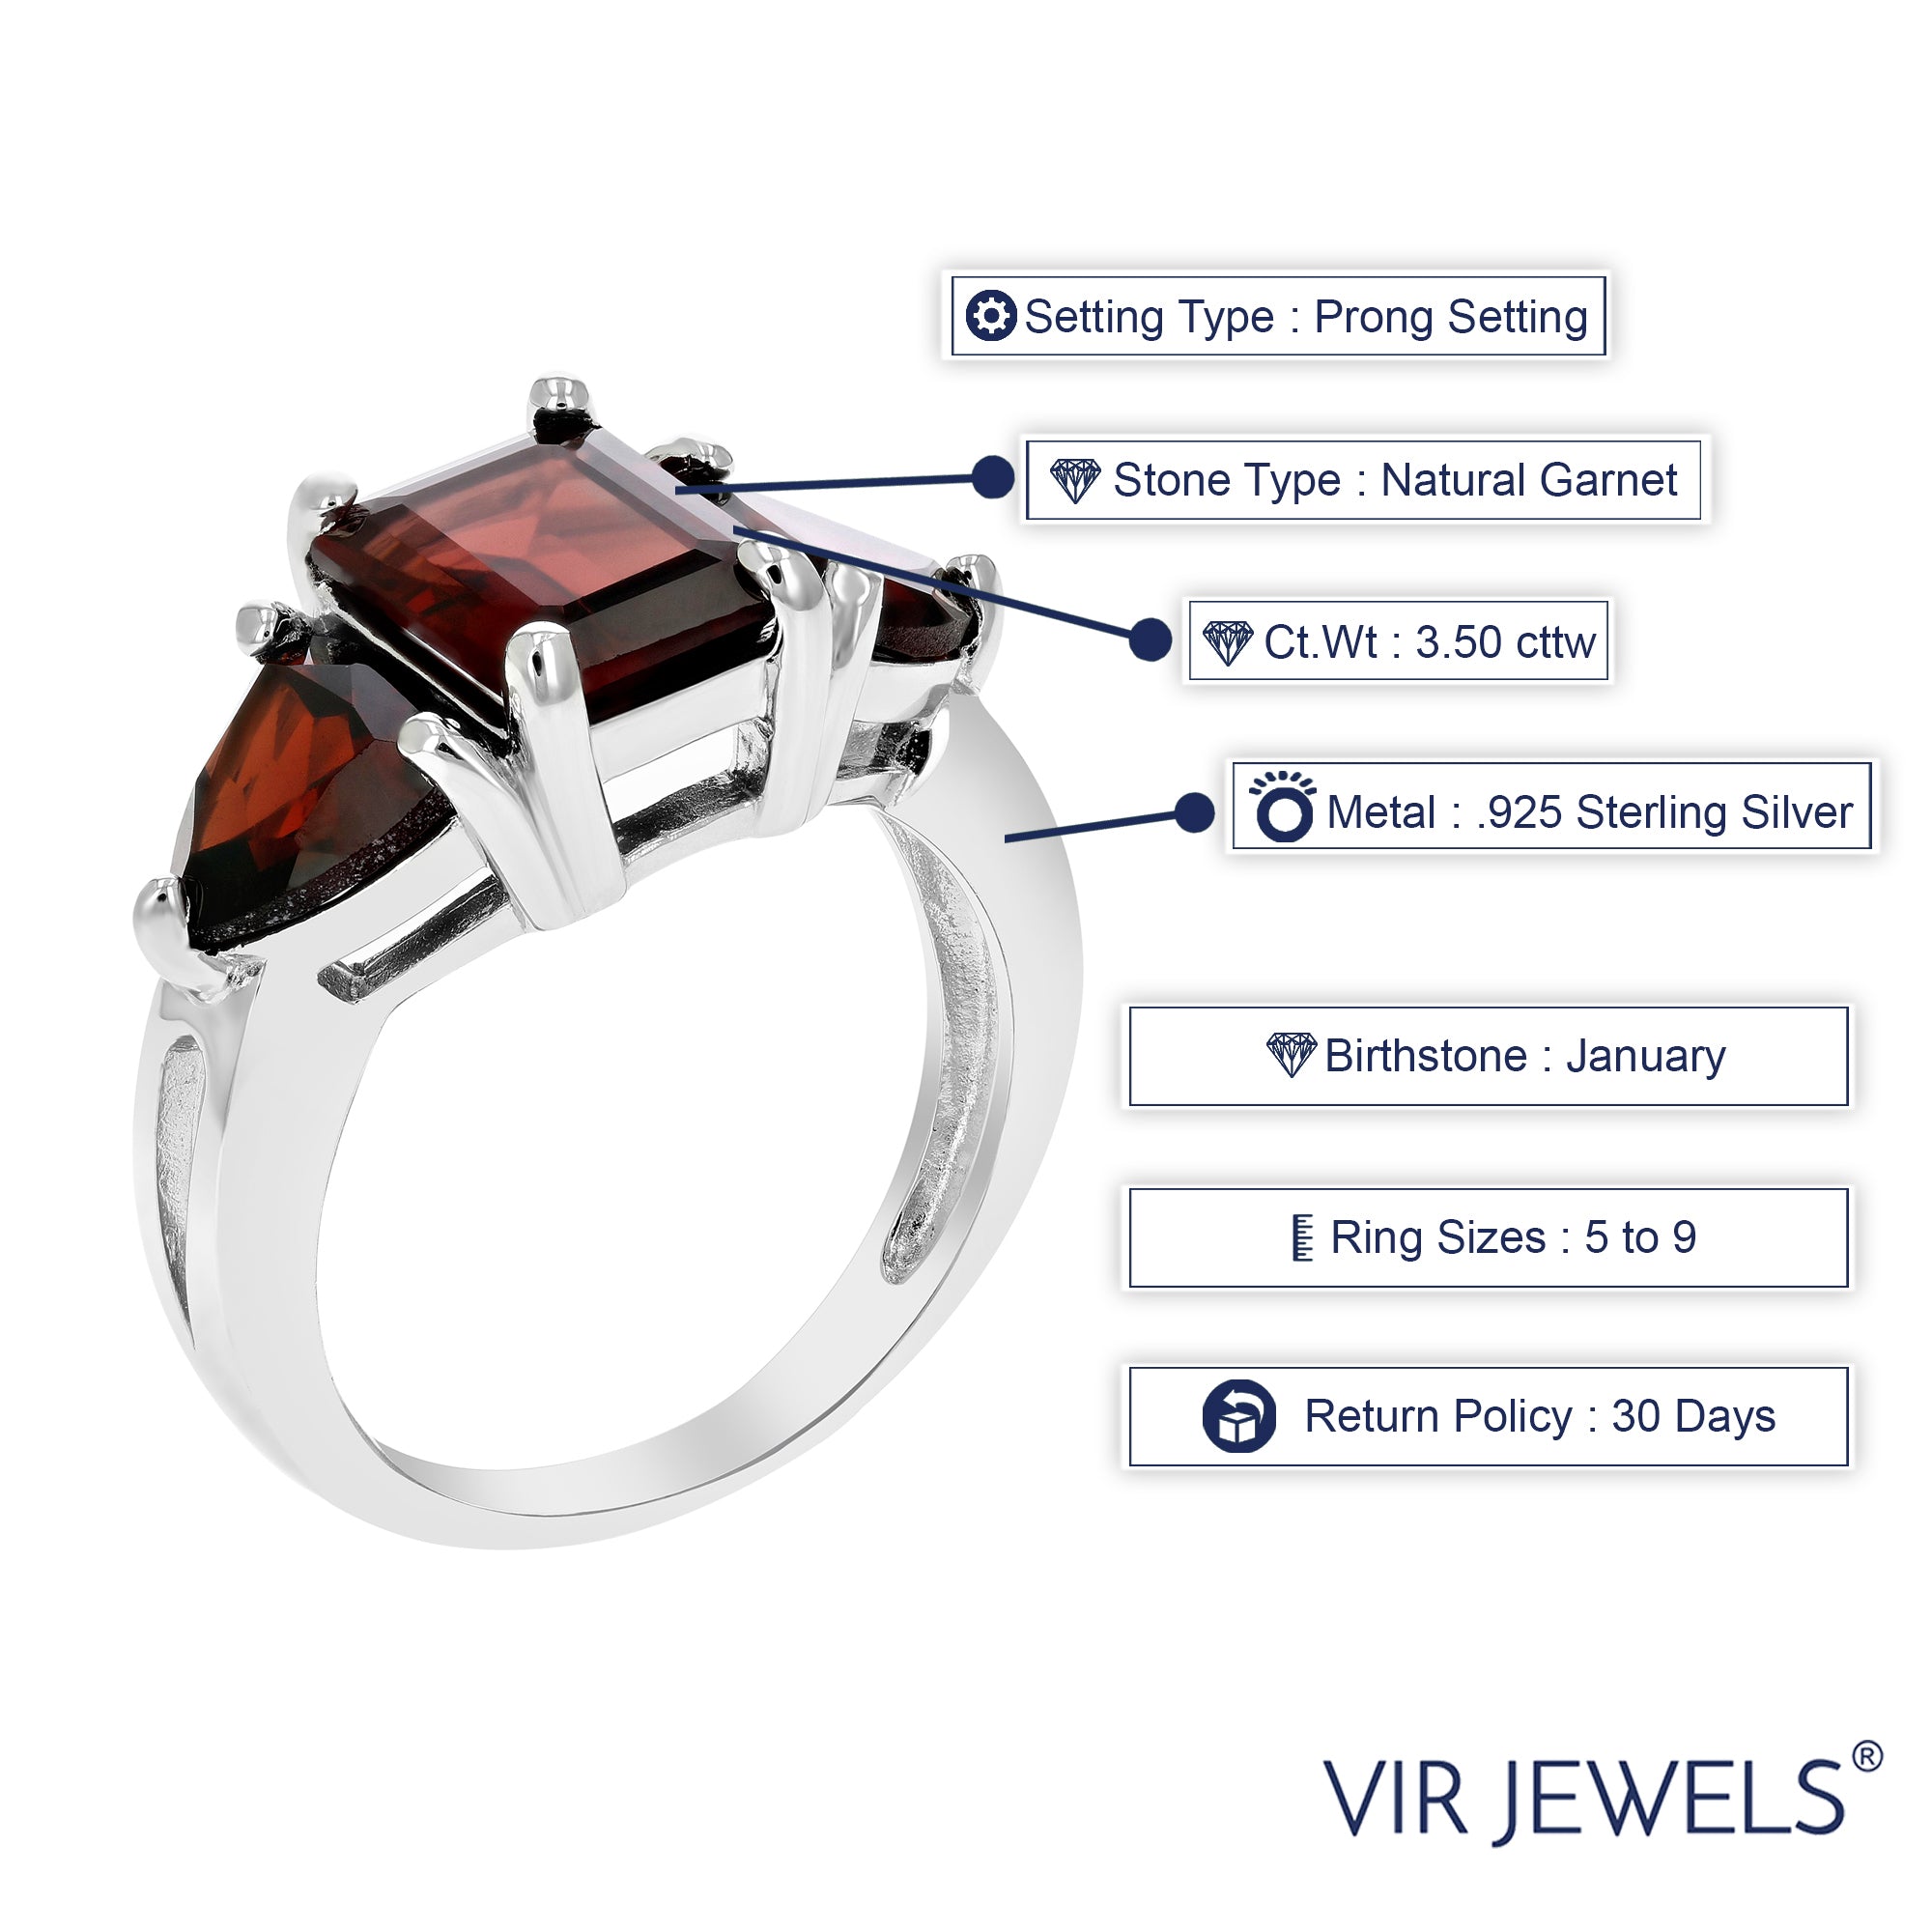 3.50 cttw 3 Stone Garnet Ring .925 Sterling Silver with Rhodium Plating Emerald